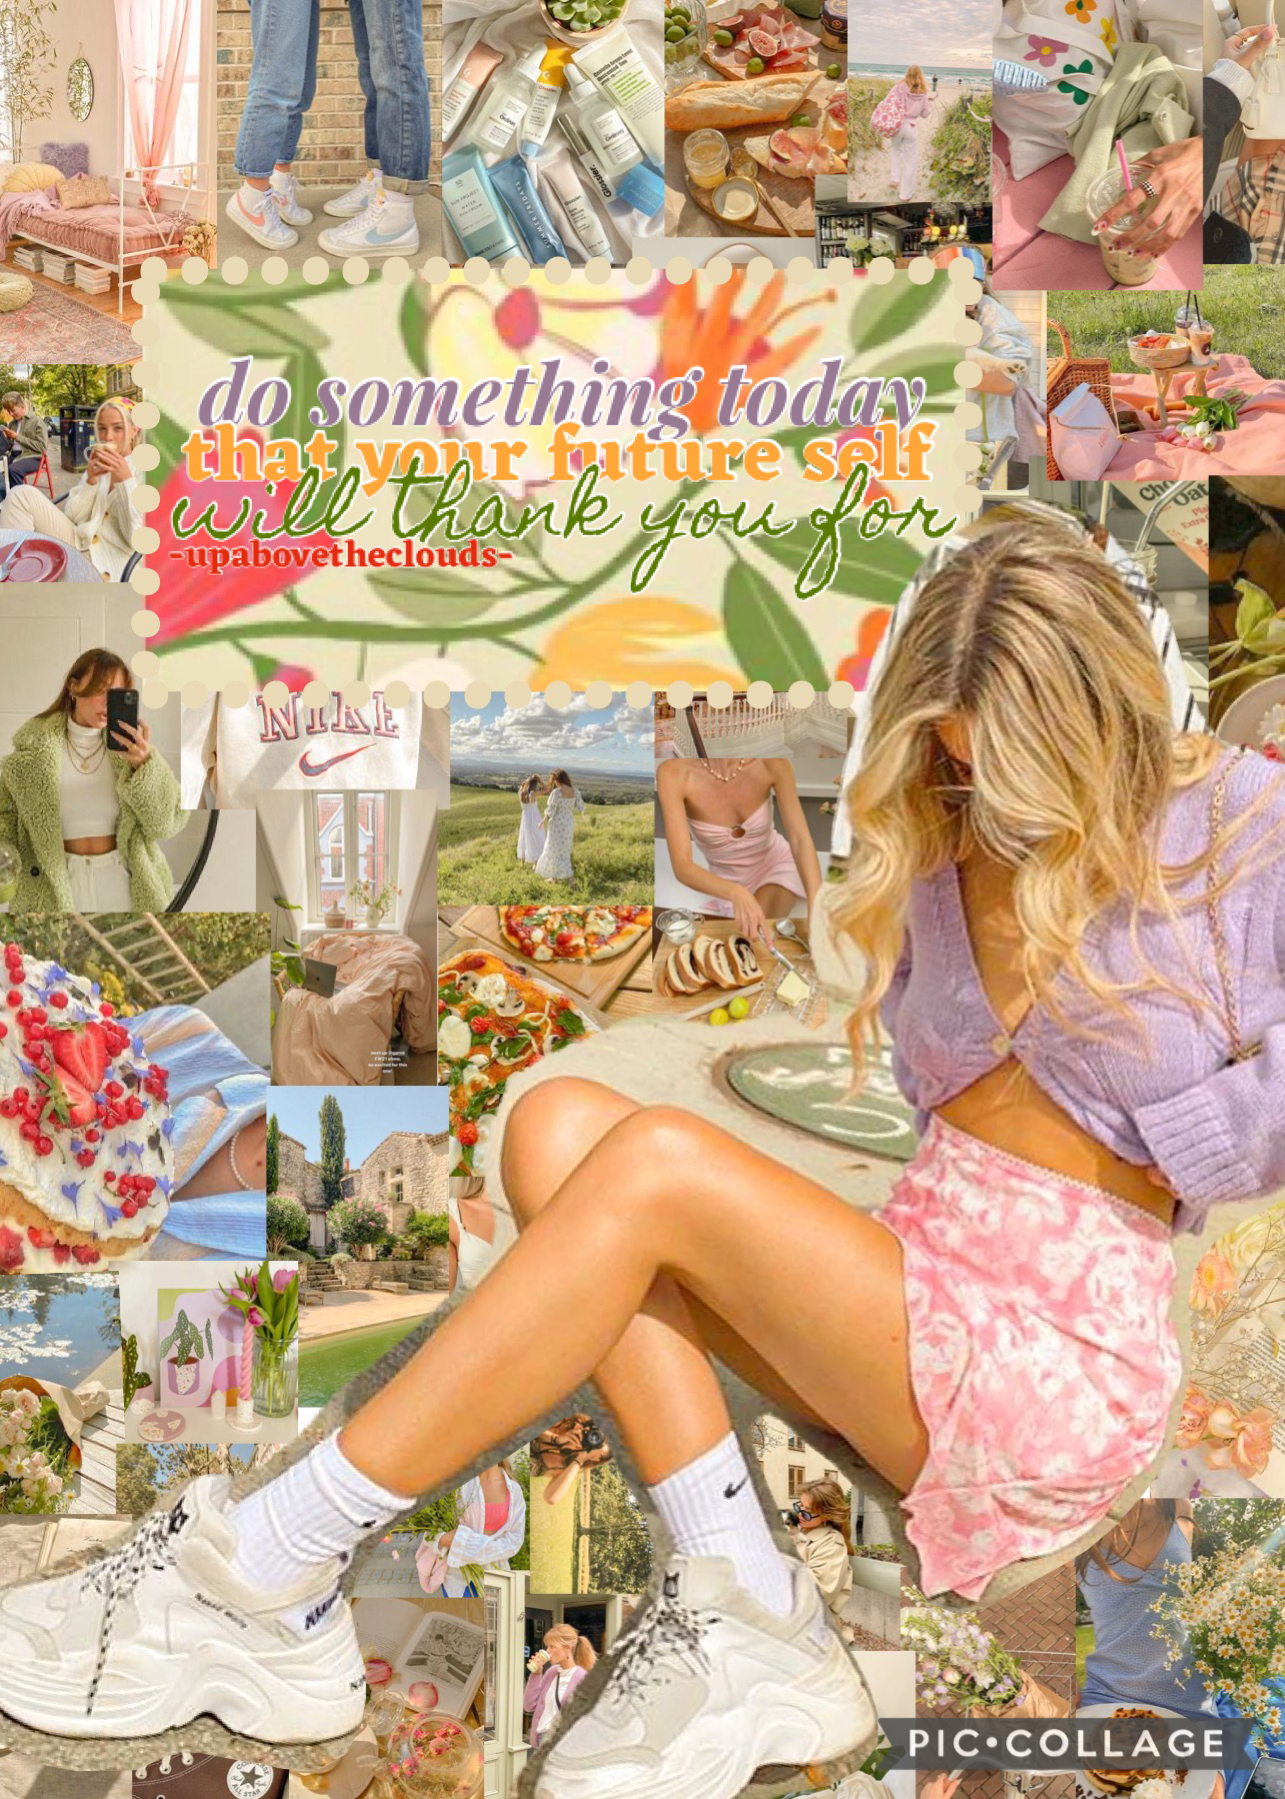 {June 7, 2021}

Hey guys it’s Sarah (-shiningsky-) I made this account because I also love this aesthetic not just preppy!! Hope y’all like it too!